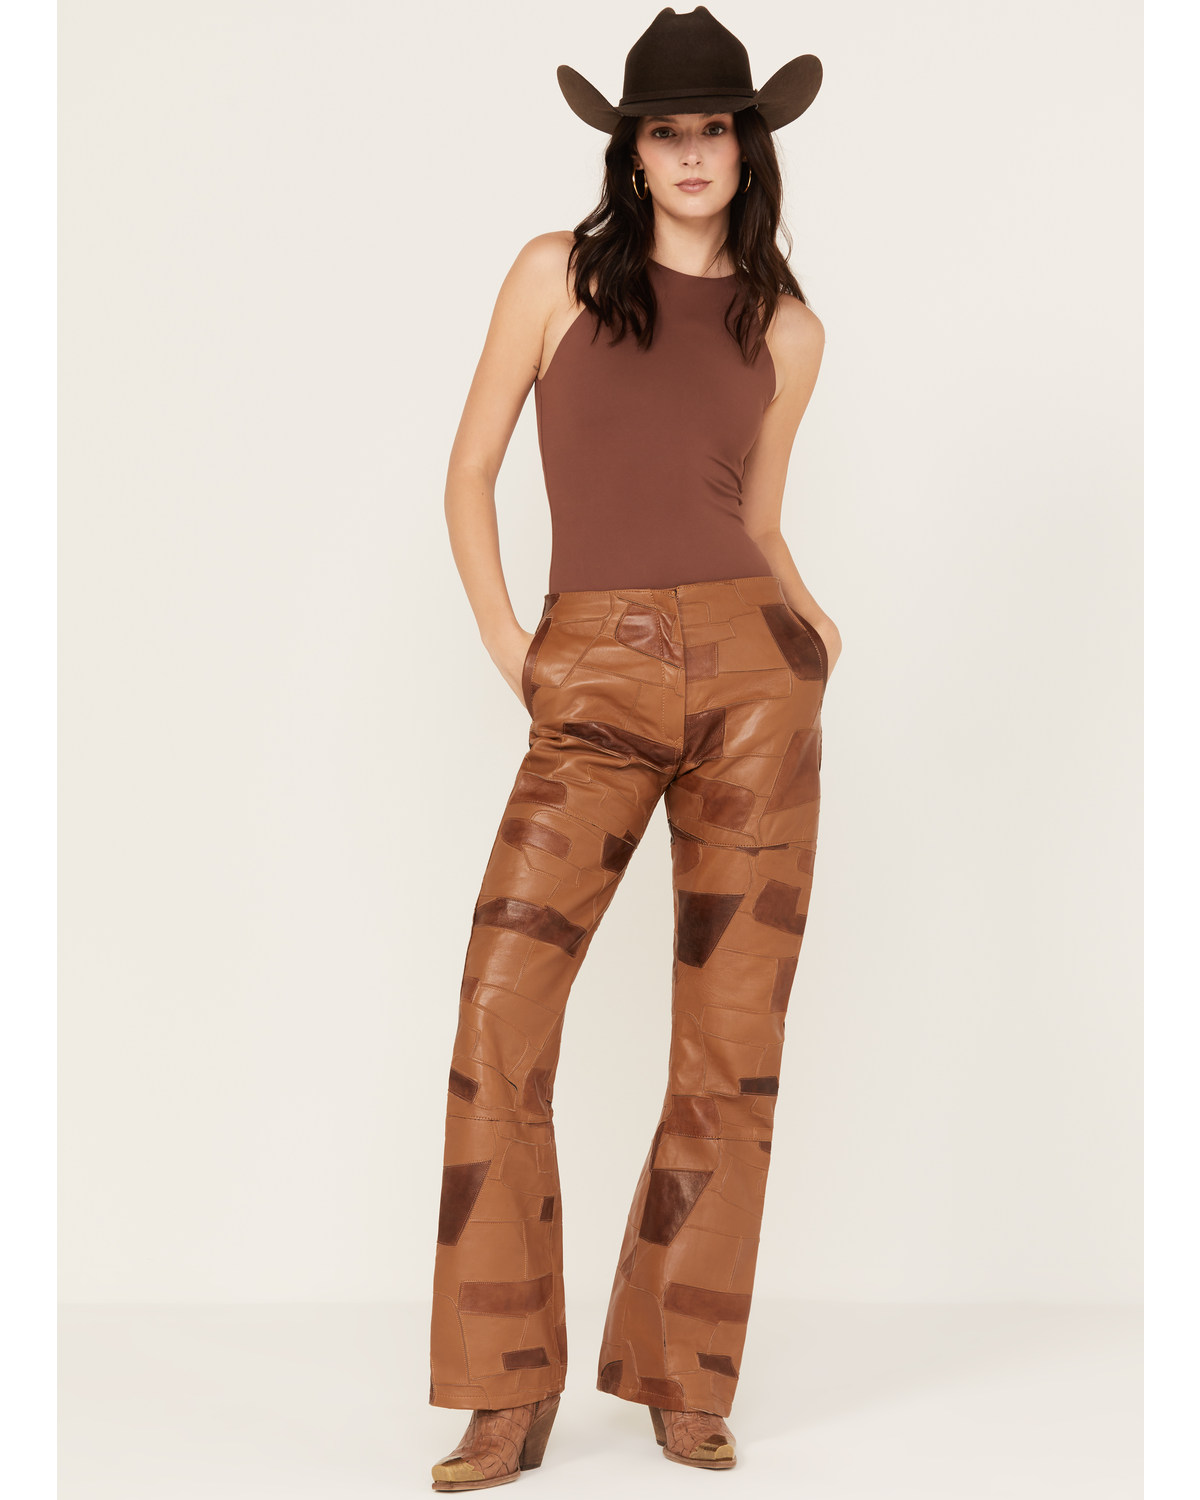 Understated Leather Women's Vixen Mid Rise Patched Pants